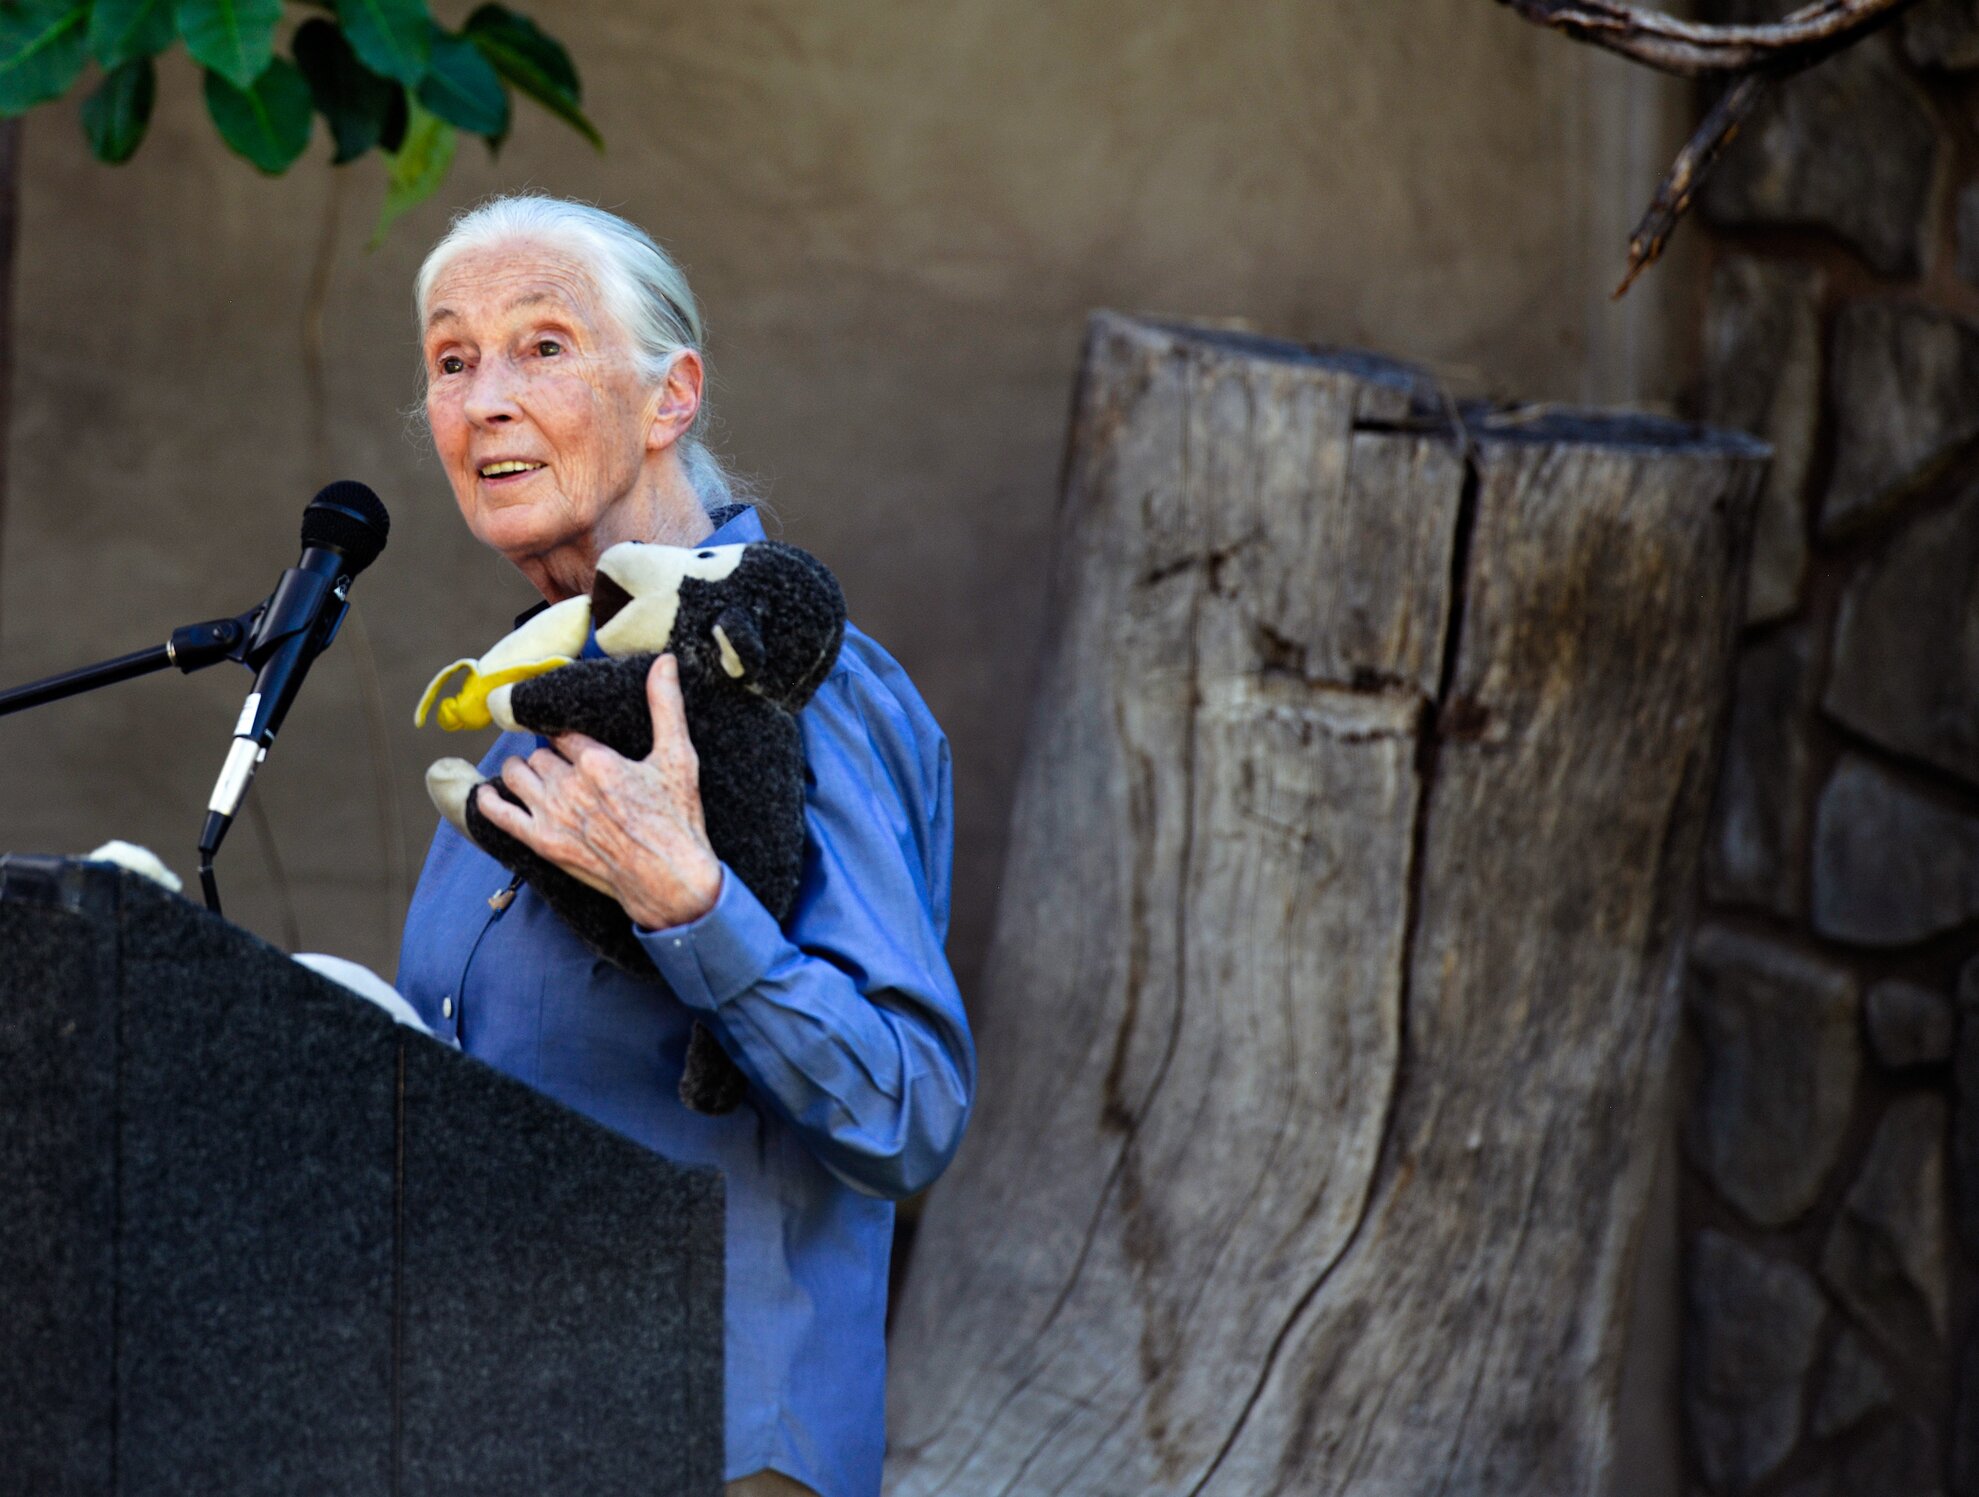 An evening with Jane Goodall